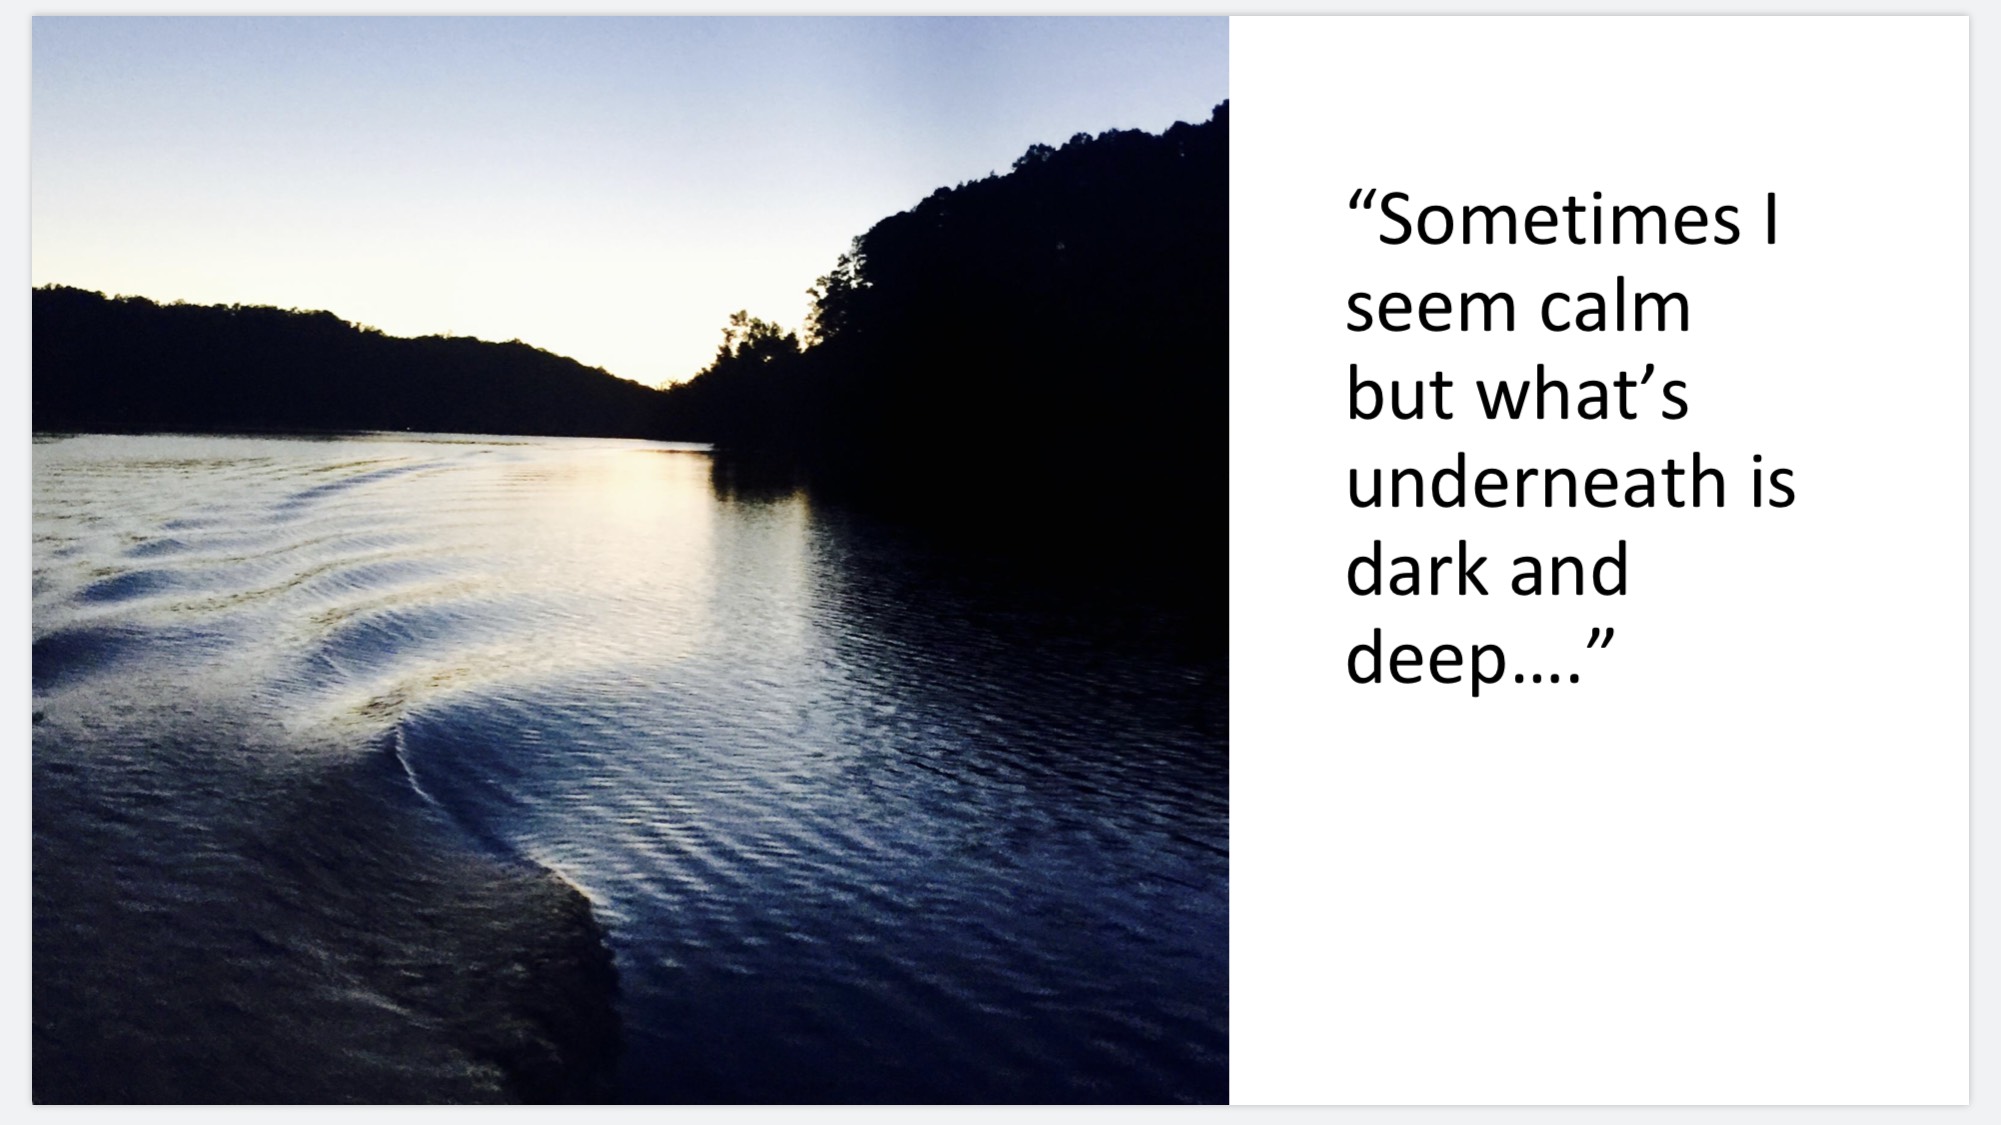 Quote Saying: Sometimes I seem calm but what's underneath is dark and deep